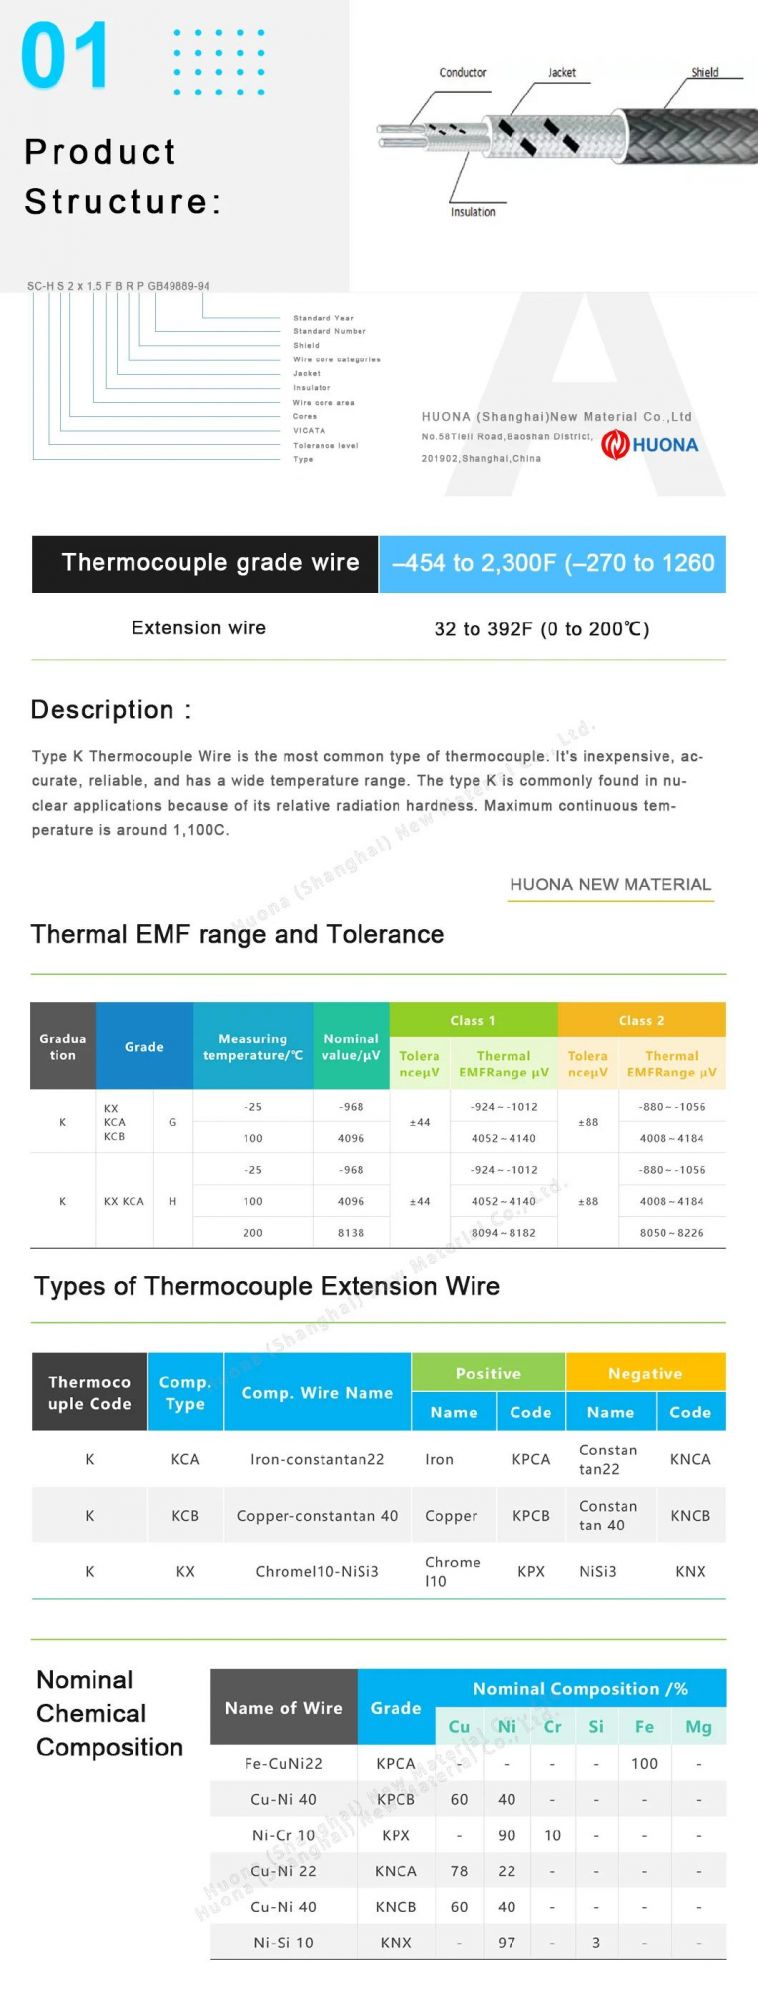 China Customized Electric Resistance Alloy Insulated Thermocouple Wire/Cable 7*0.3